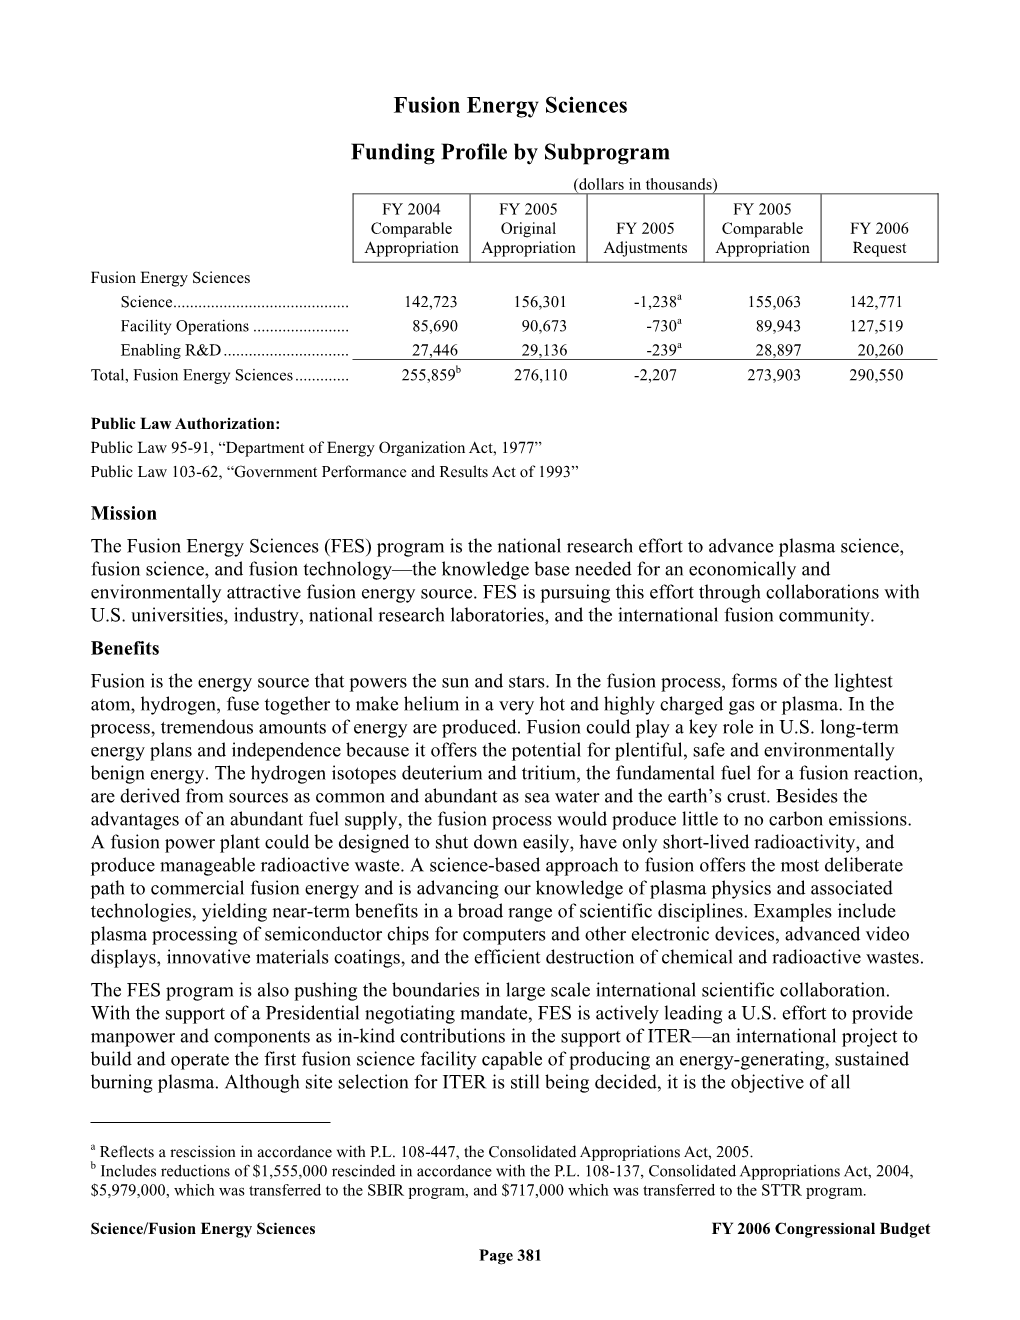 Fusion Energy Sciences Funding Profile by Subprogram